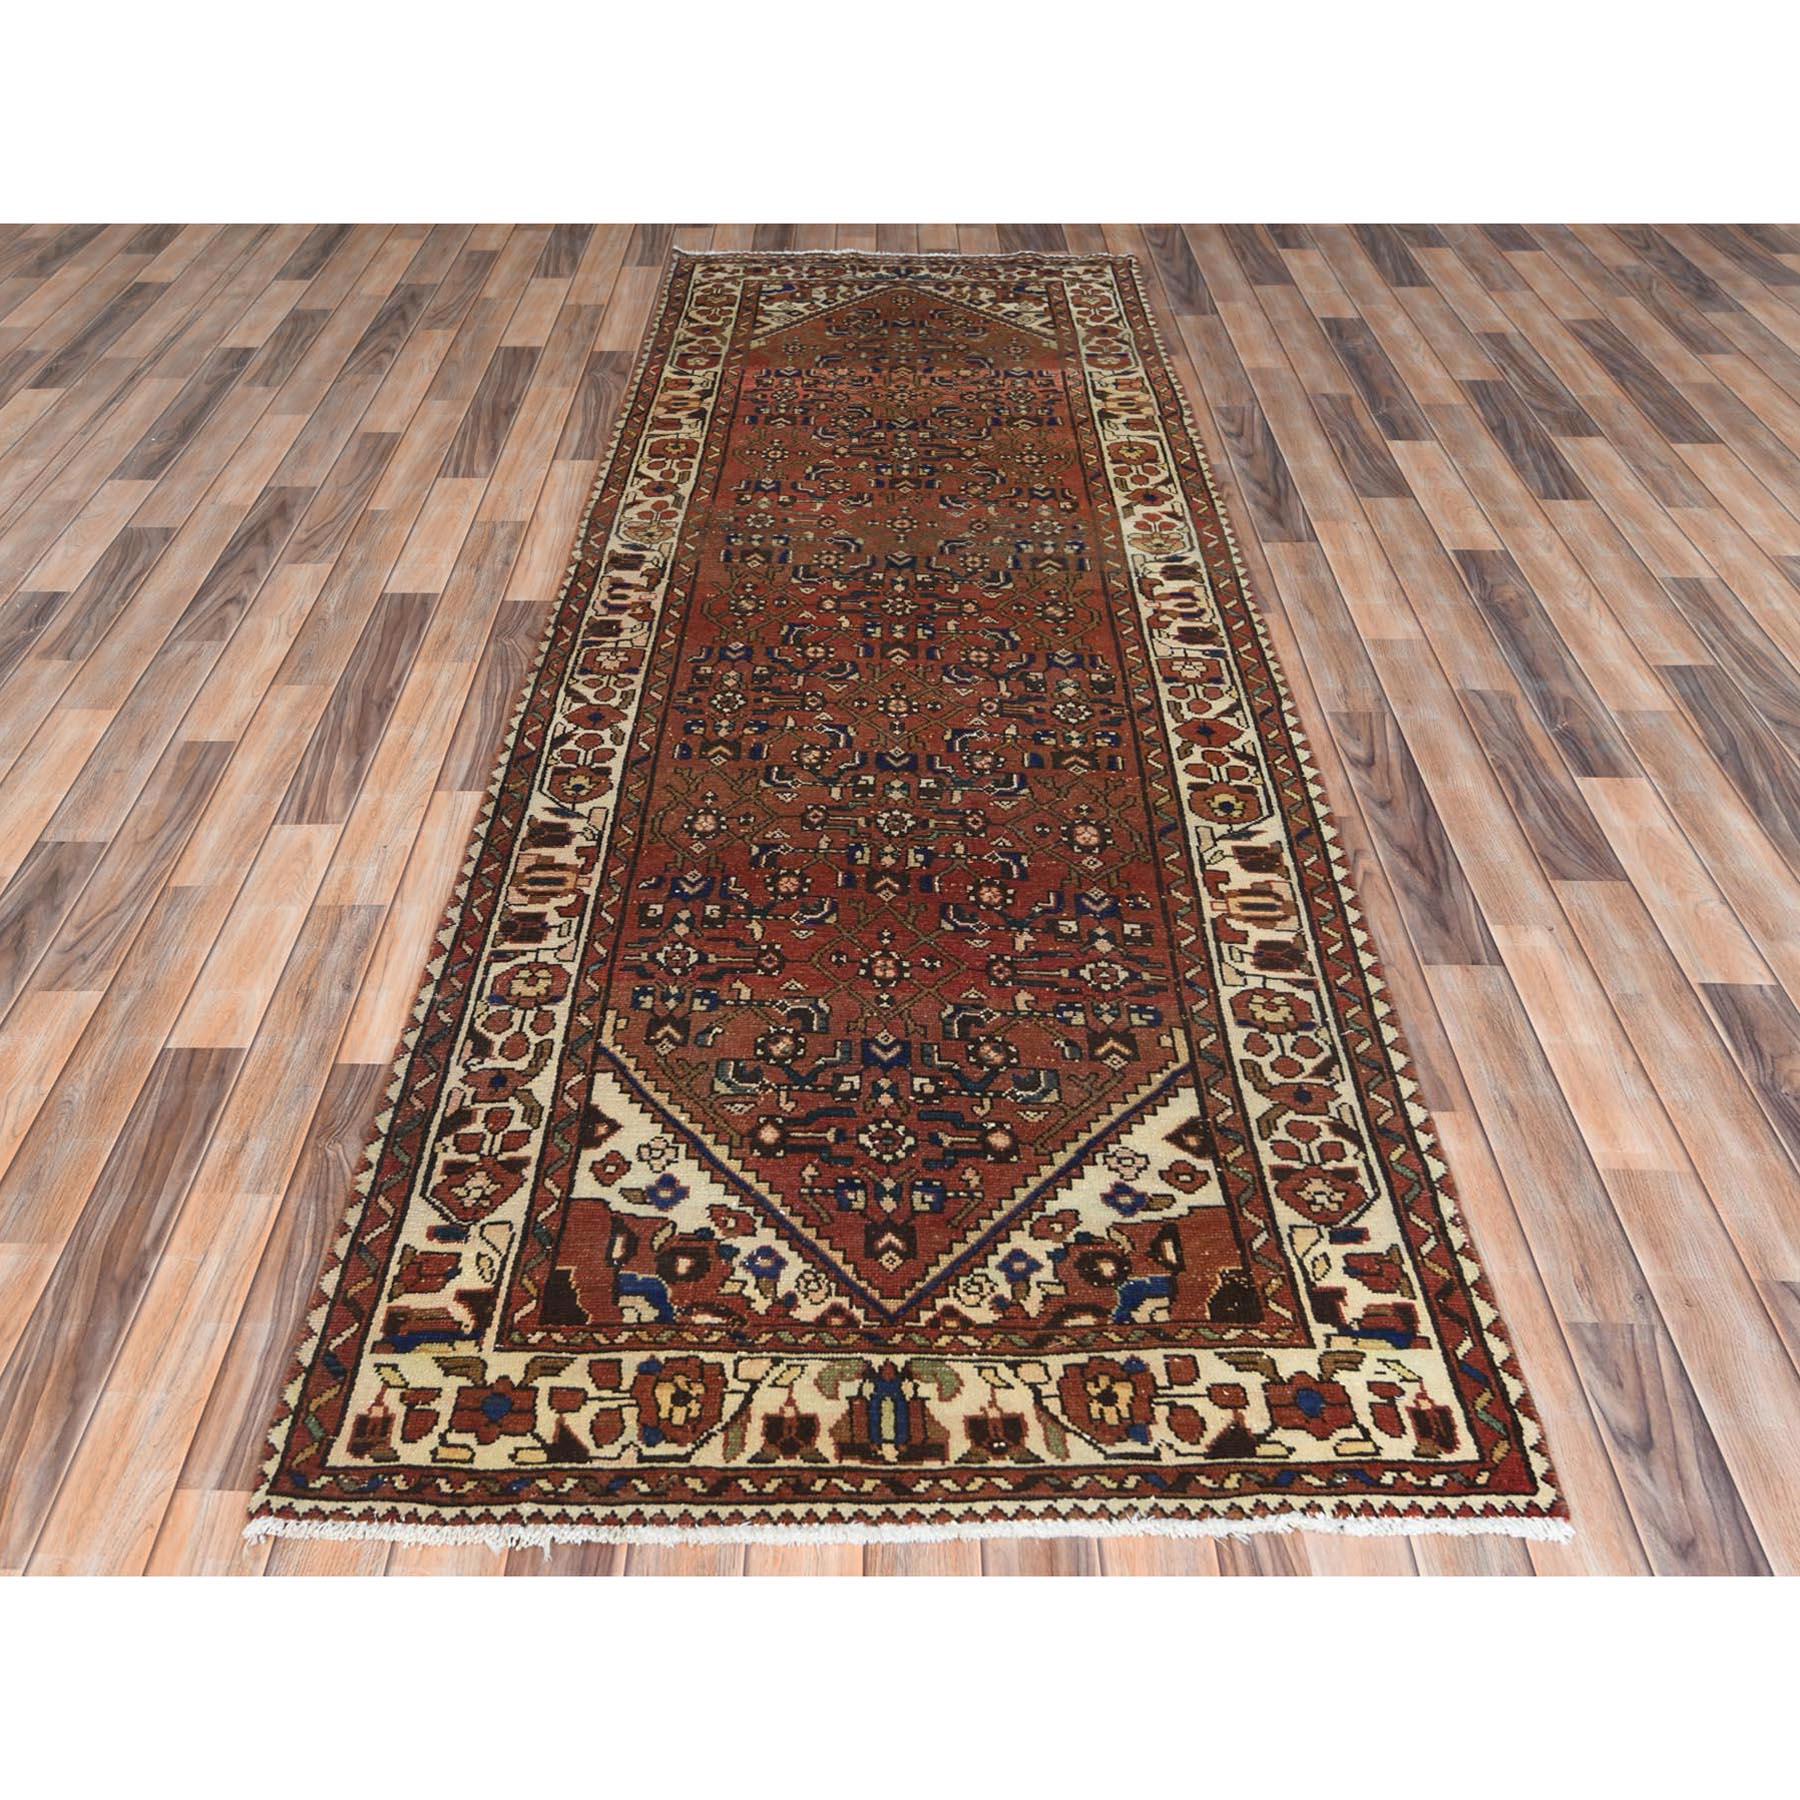 This fabulous hand-knotted carpet has been created and designed for extra strength and durability. This rug has been handcrafted for weeks in the traditional method that is used to make
Exact Rug Size in Feet and Inches : 3'7